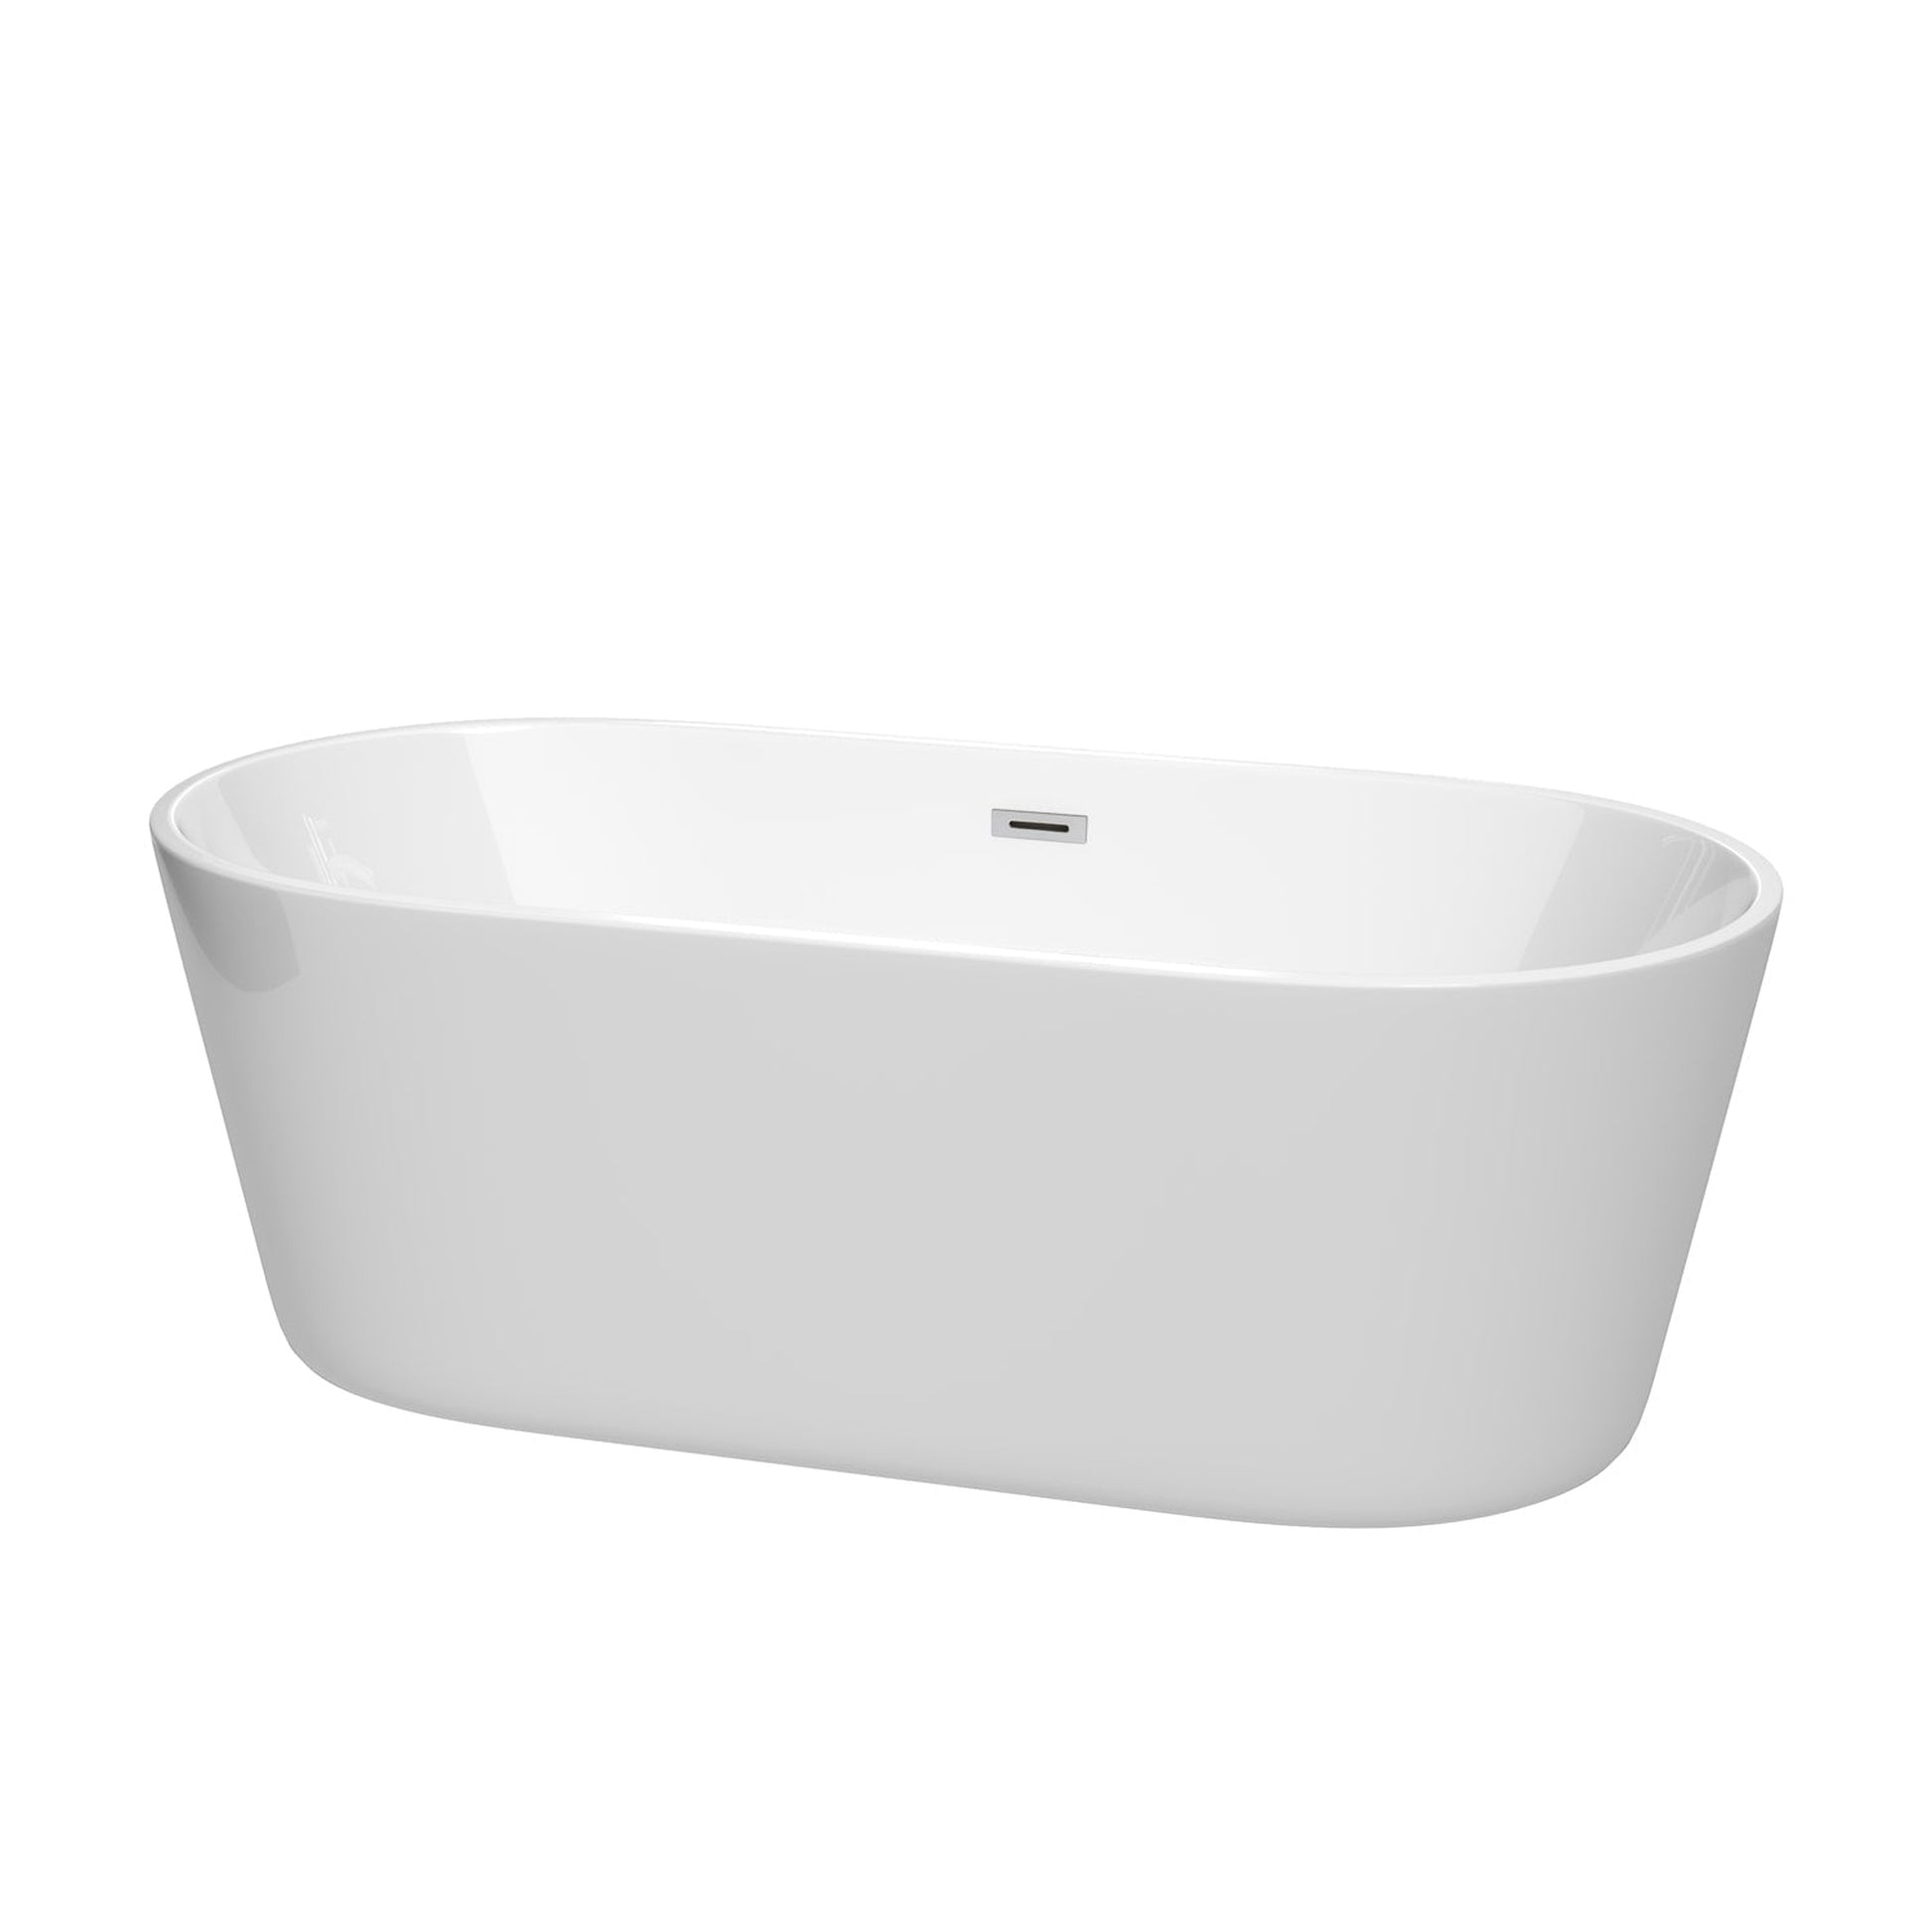 Wyndham Collection Carissa 67" Freestanding Bathtub in White With Polished Chrome Drain and Overflow Trim